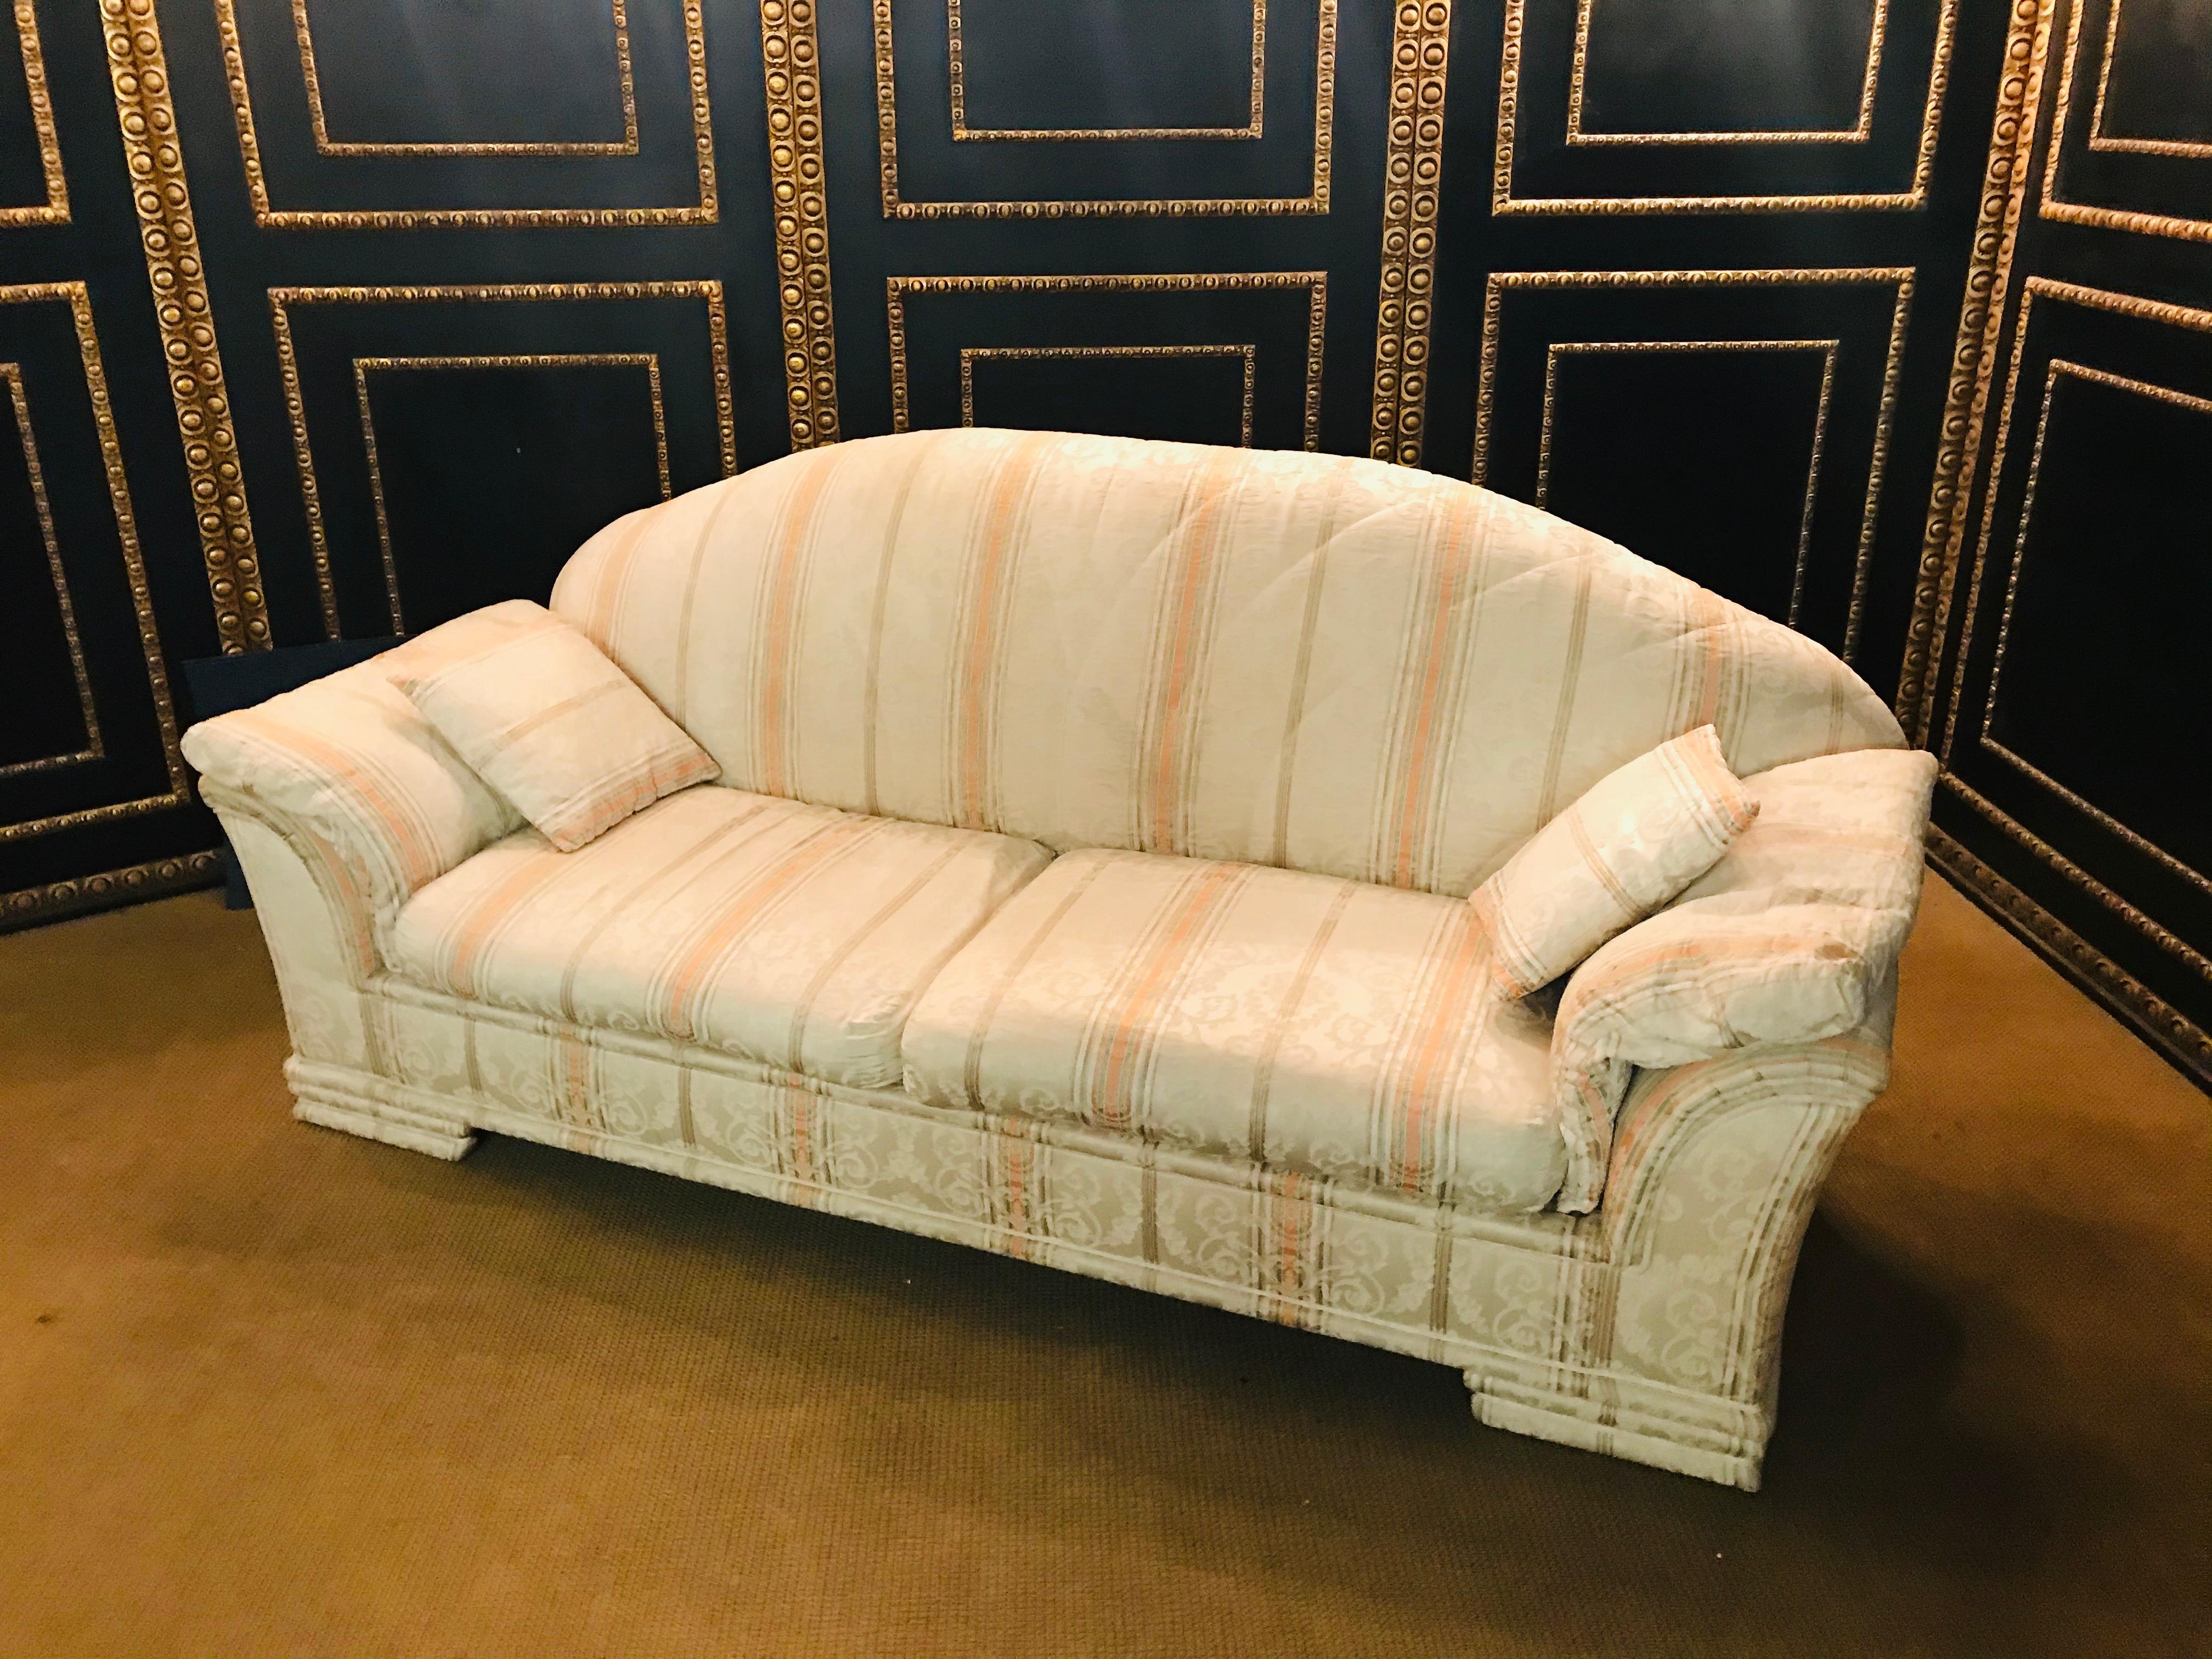 Very High-Quality Couch Set from the Bielefeld Workshops with Baroque Patterns 1